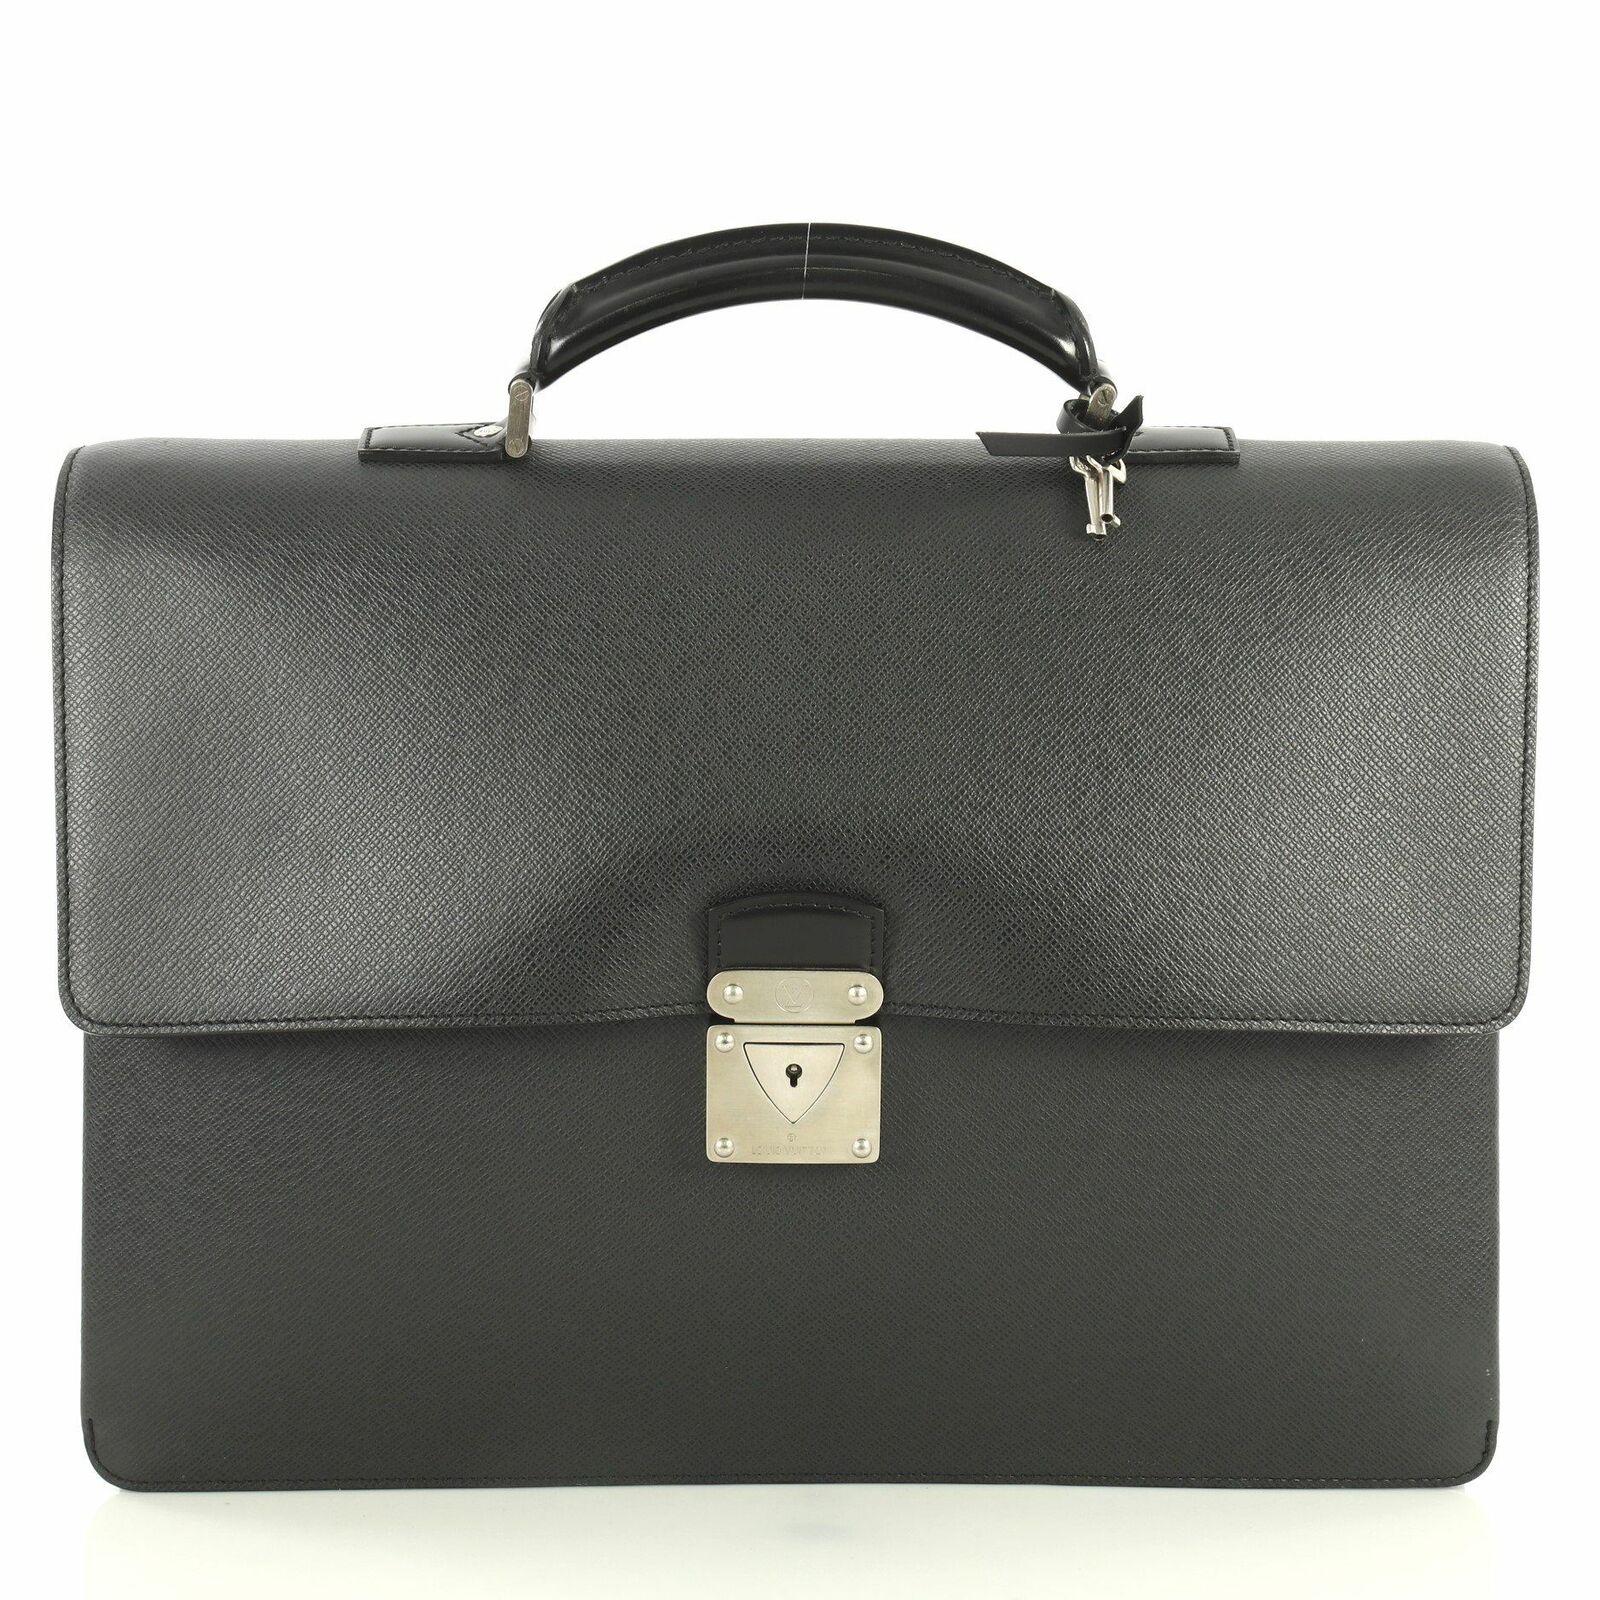 Louis Vuitton Robusto 1 Briefcase Taiga Leather in Black for Men - Lyst